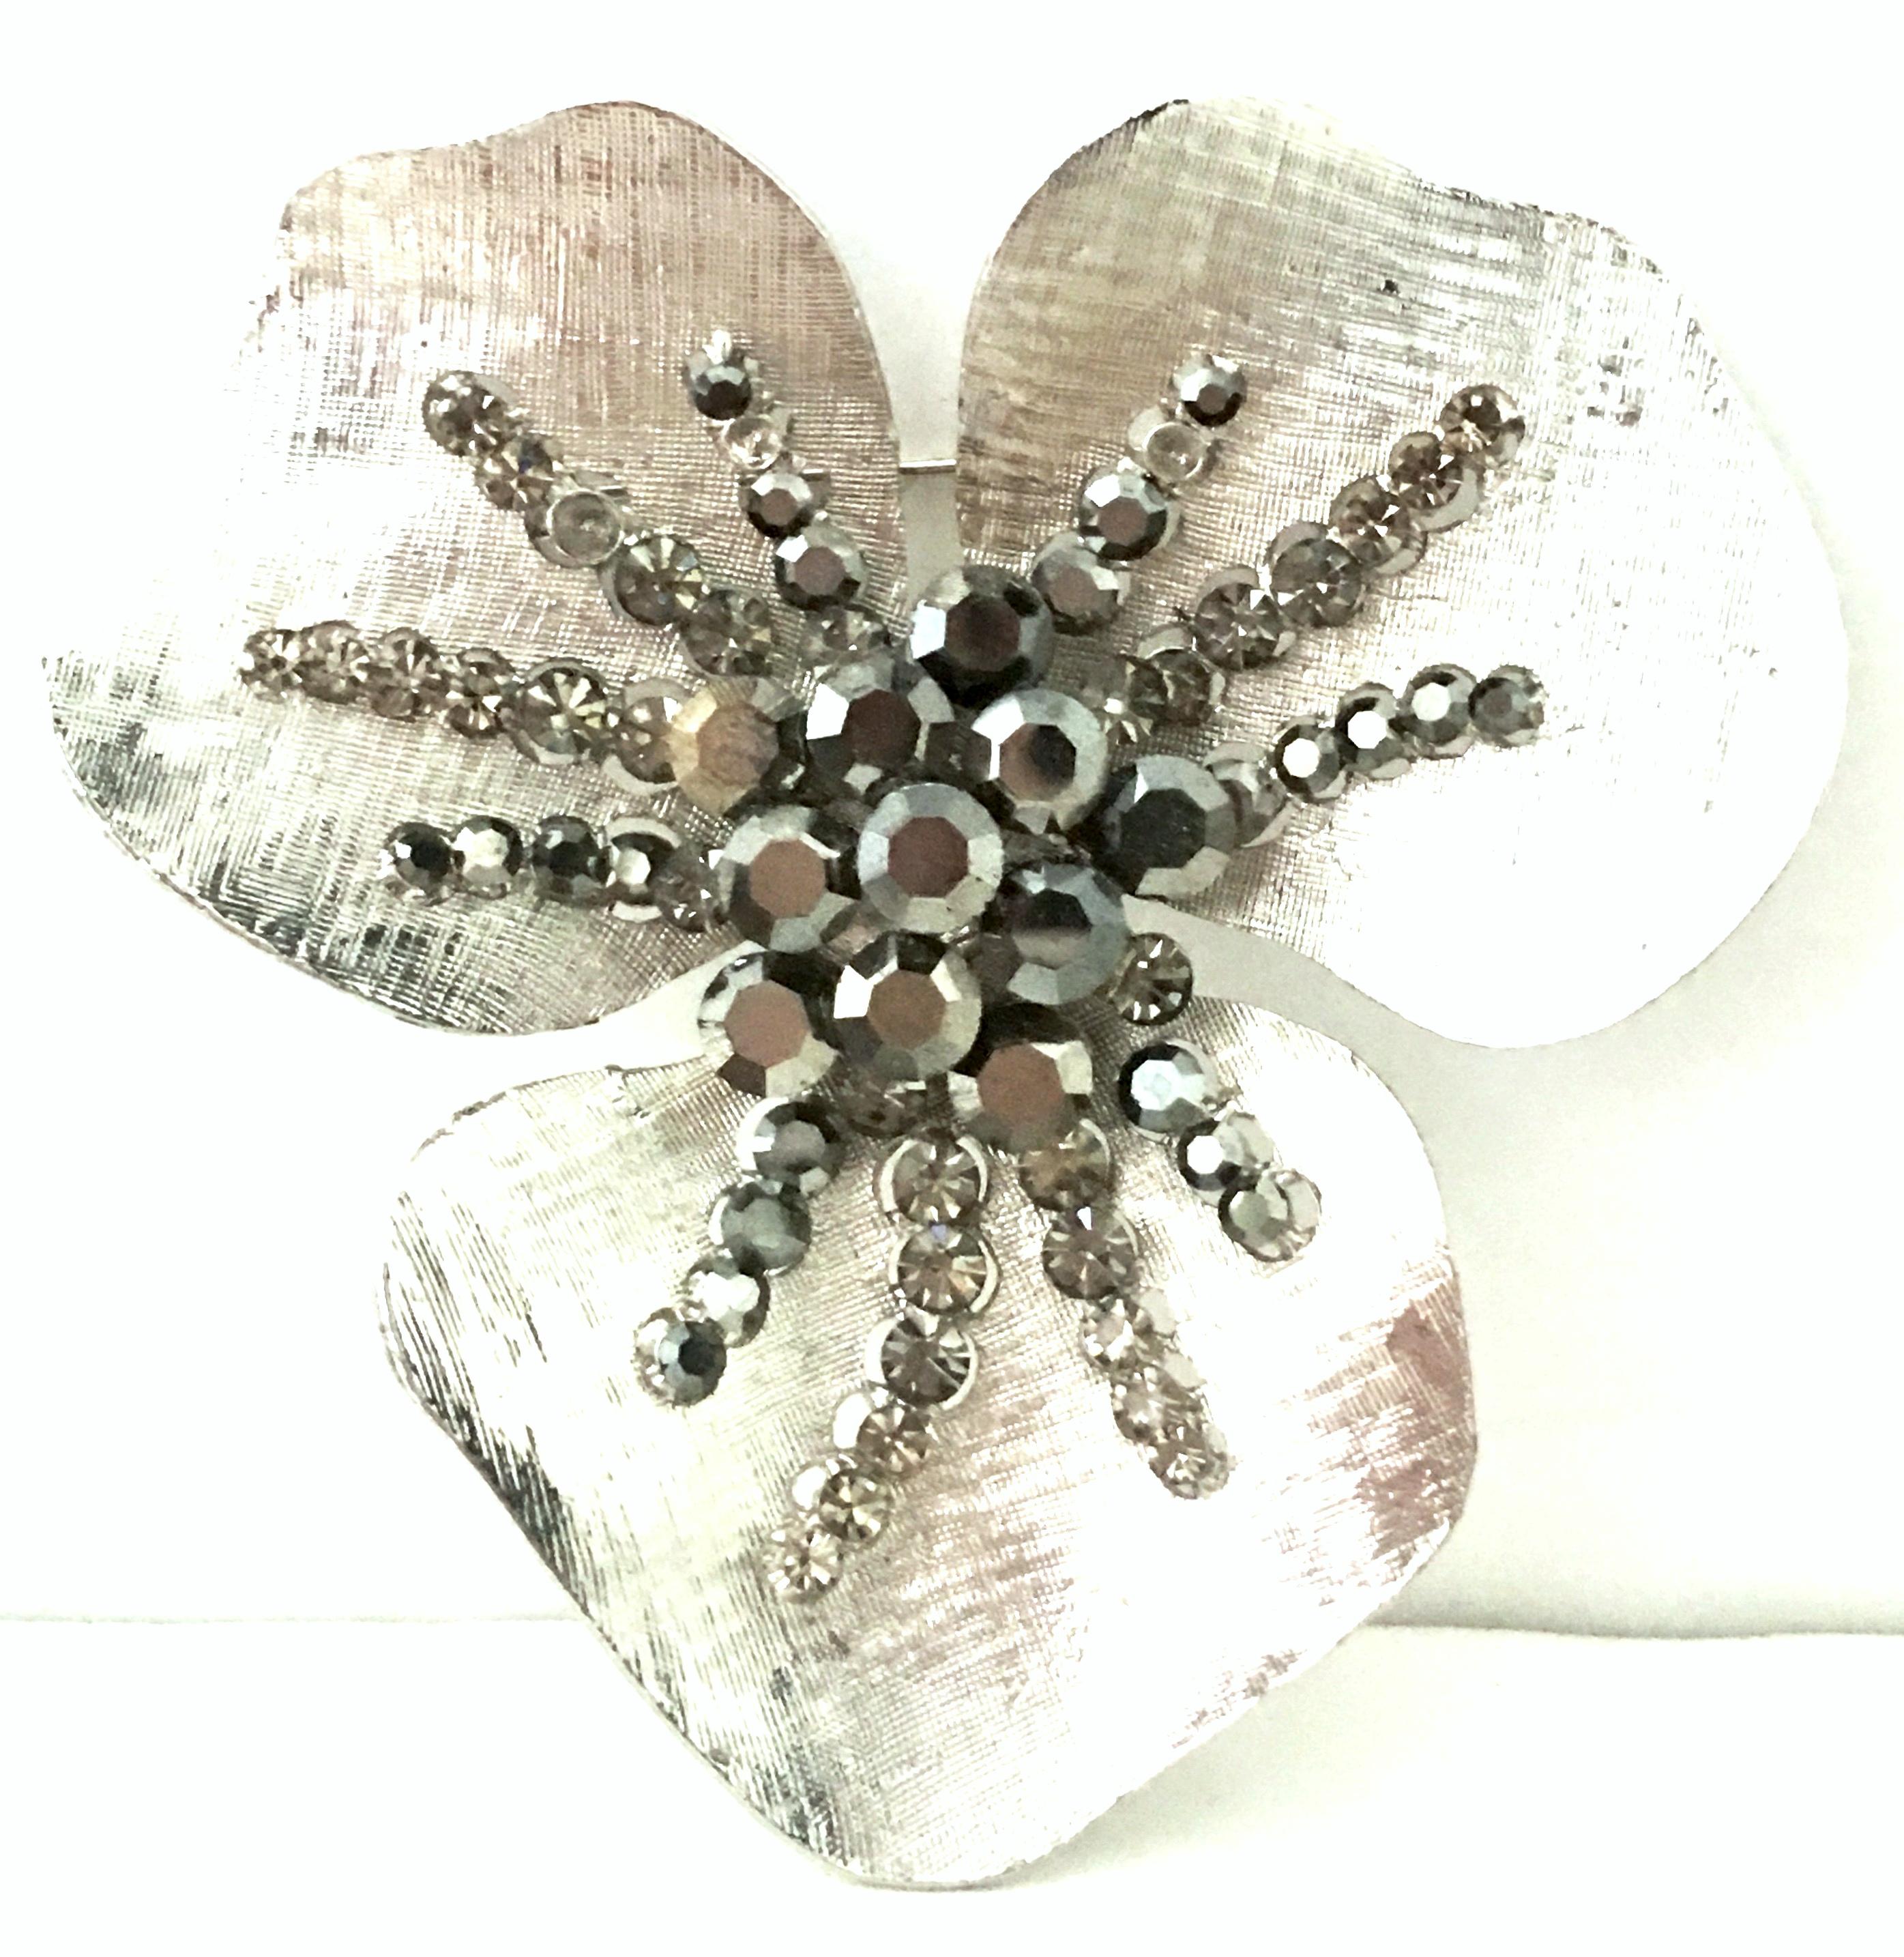 20th Century Monumental Silver & Austrian Crystal  Dimensional & Abstract Flower Brooch. Features silver tone textured metal with black, colorless and gunsmoke brilliant cut and faceted Austrian crystal stones. 